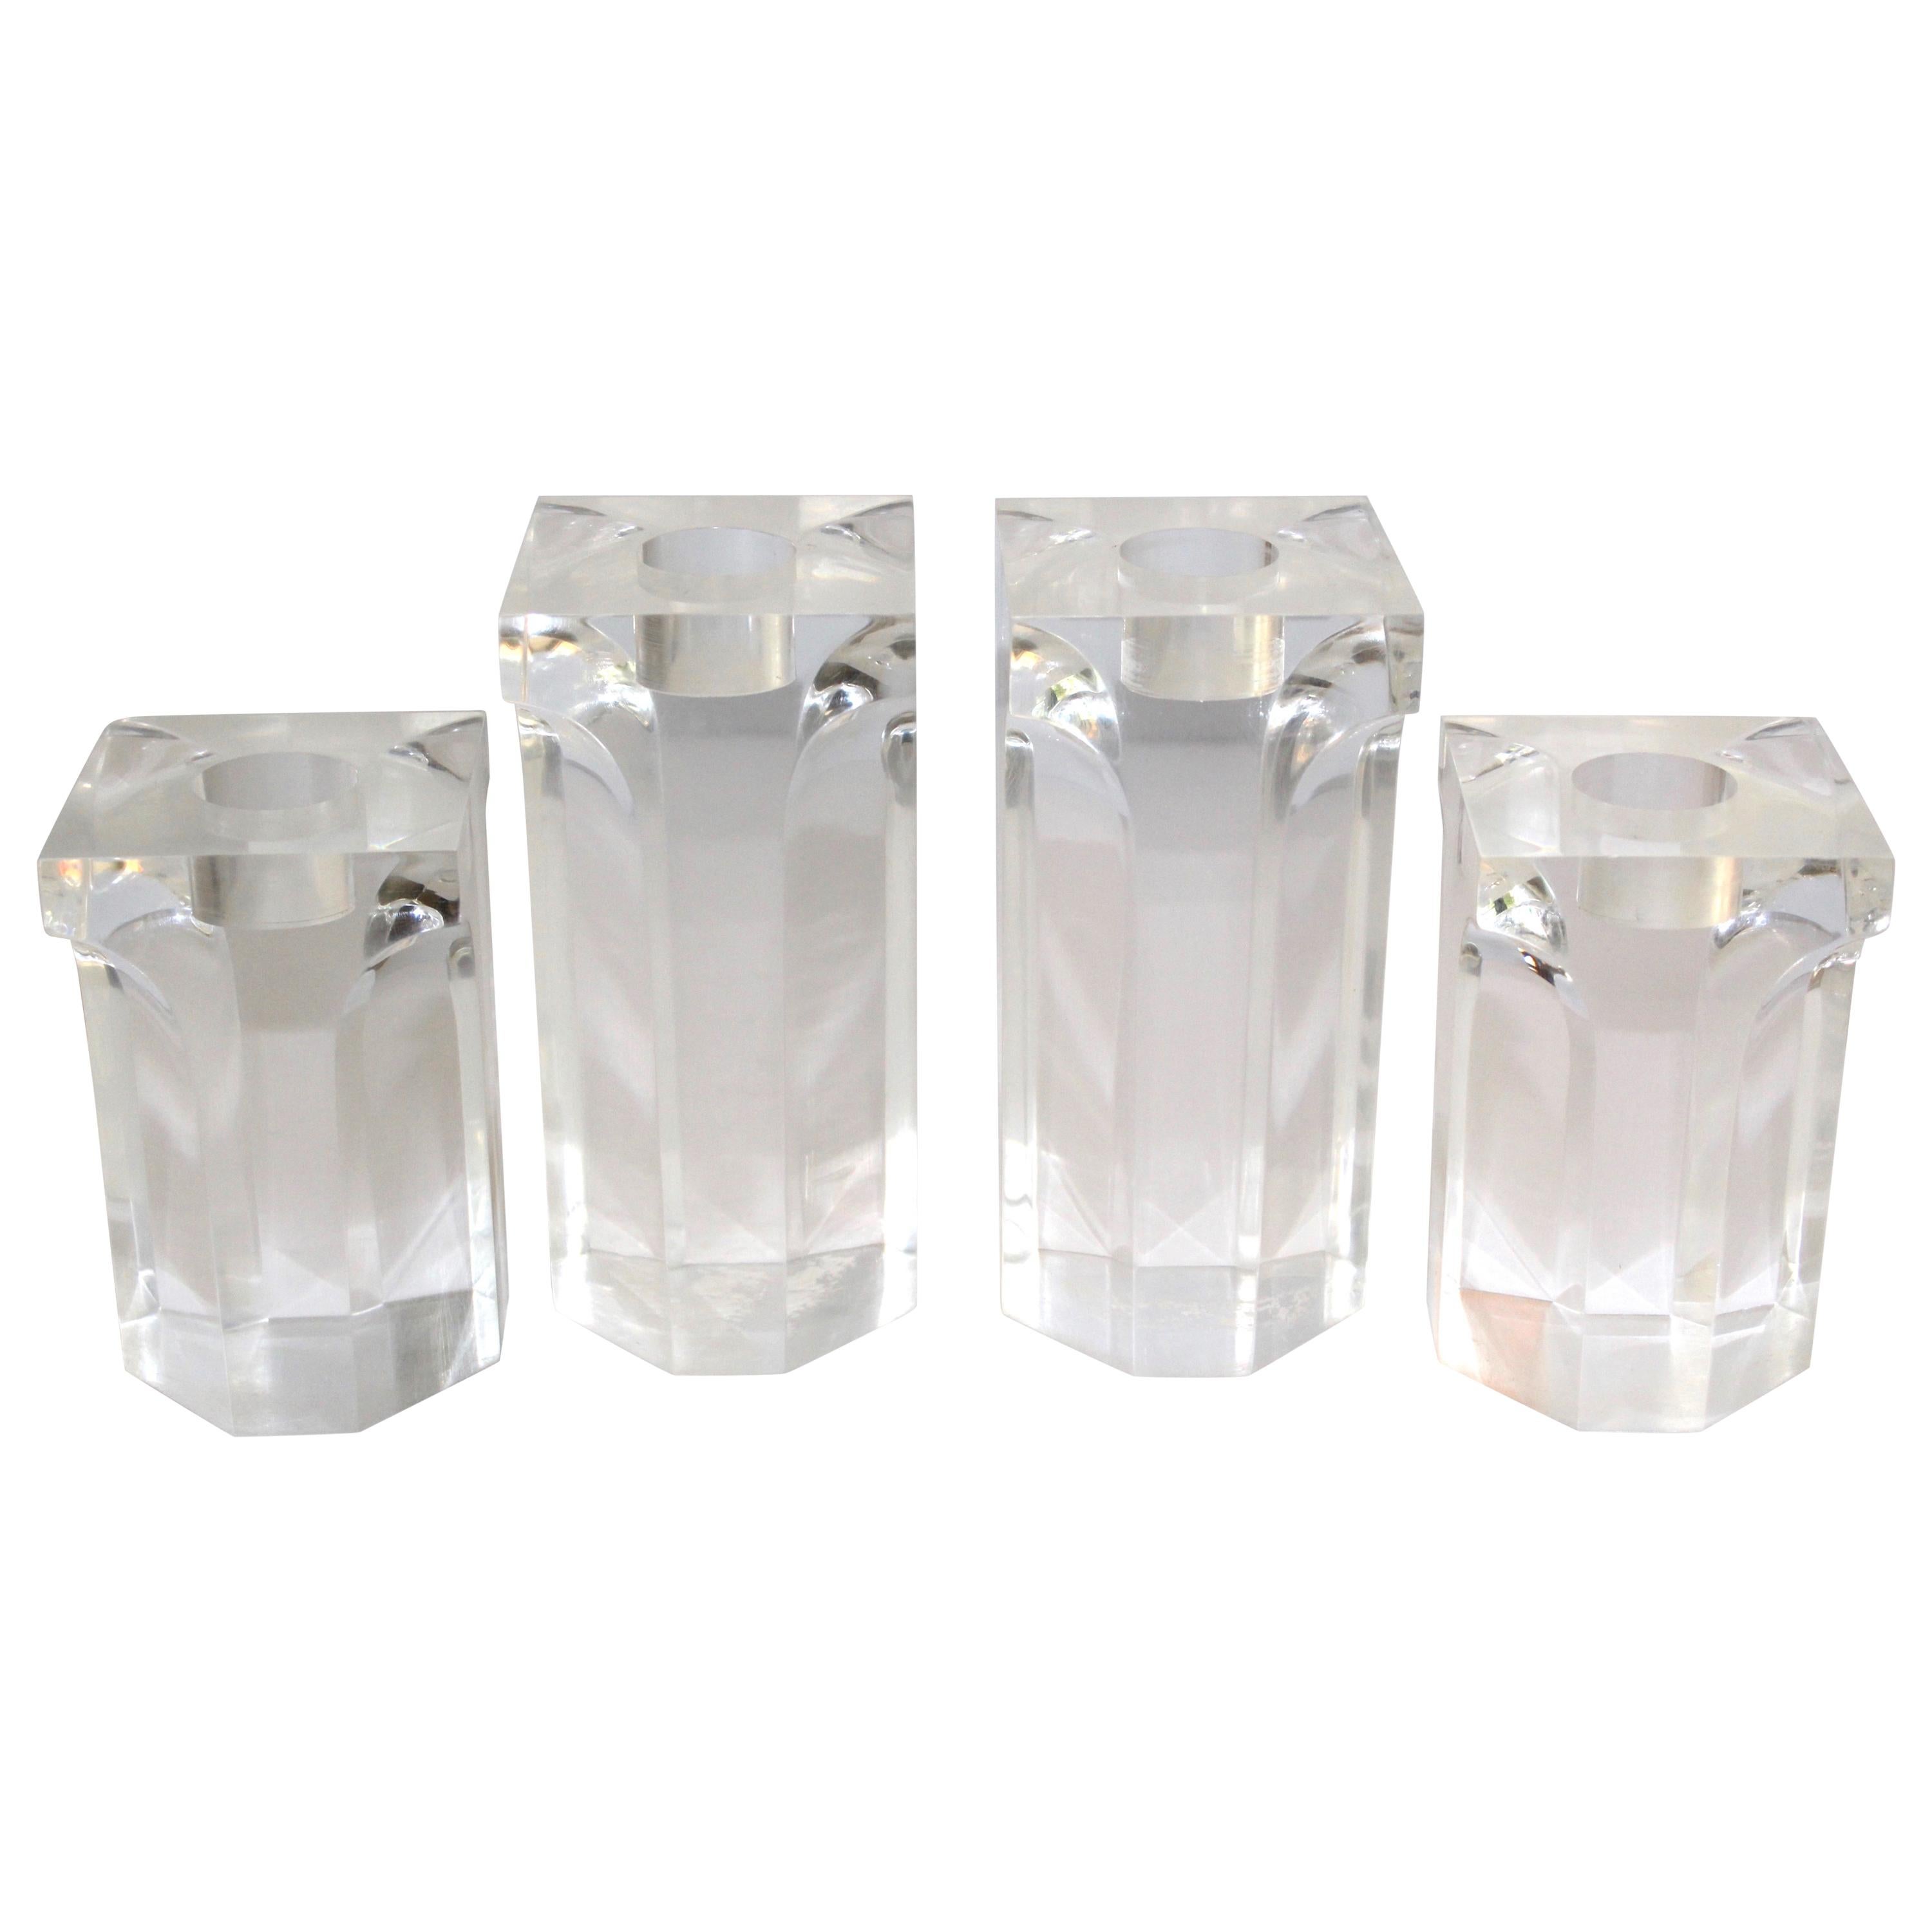 Set of Four Vintage Architectural Lucite Candleholders, 1970s